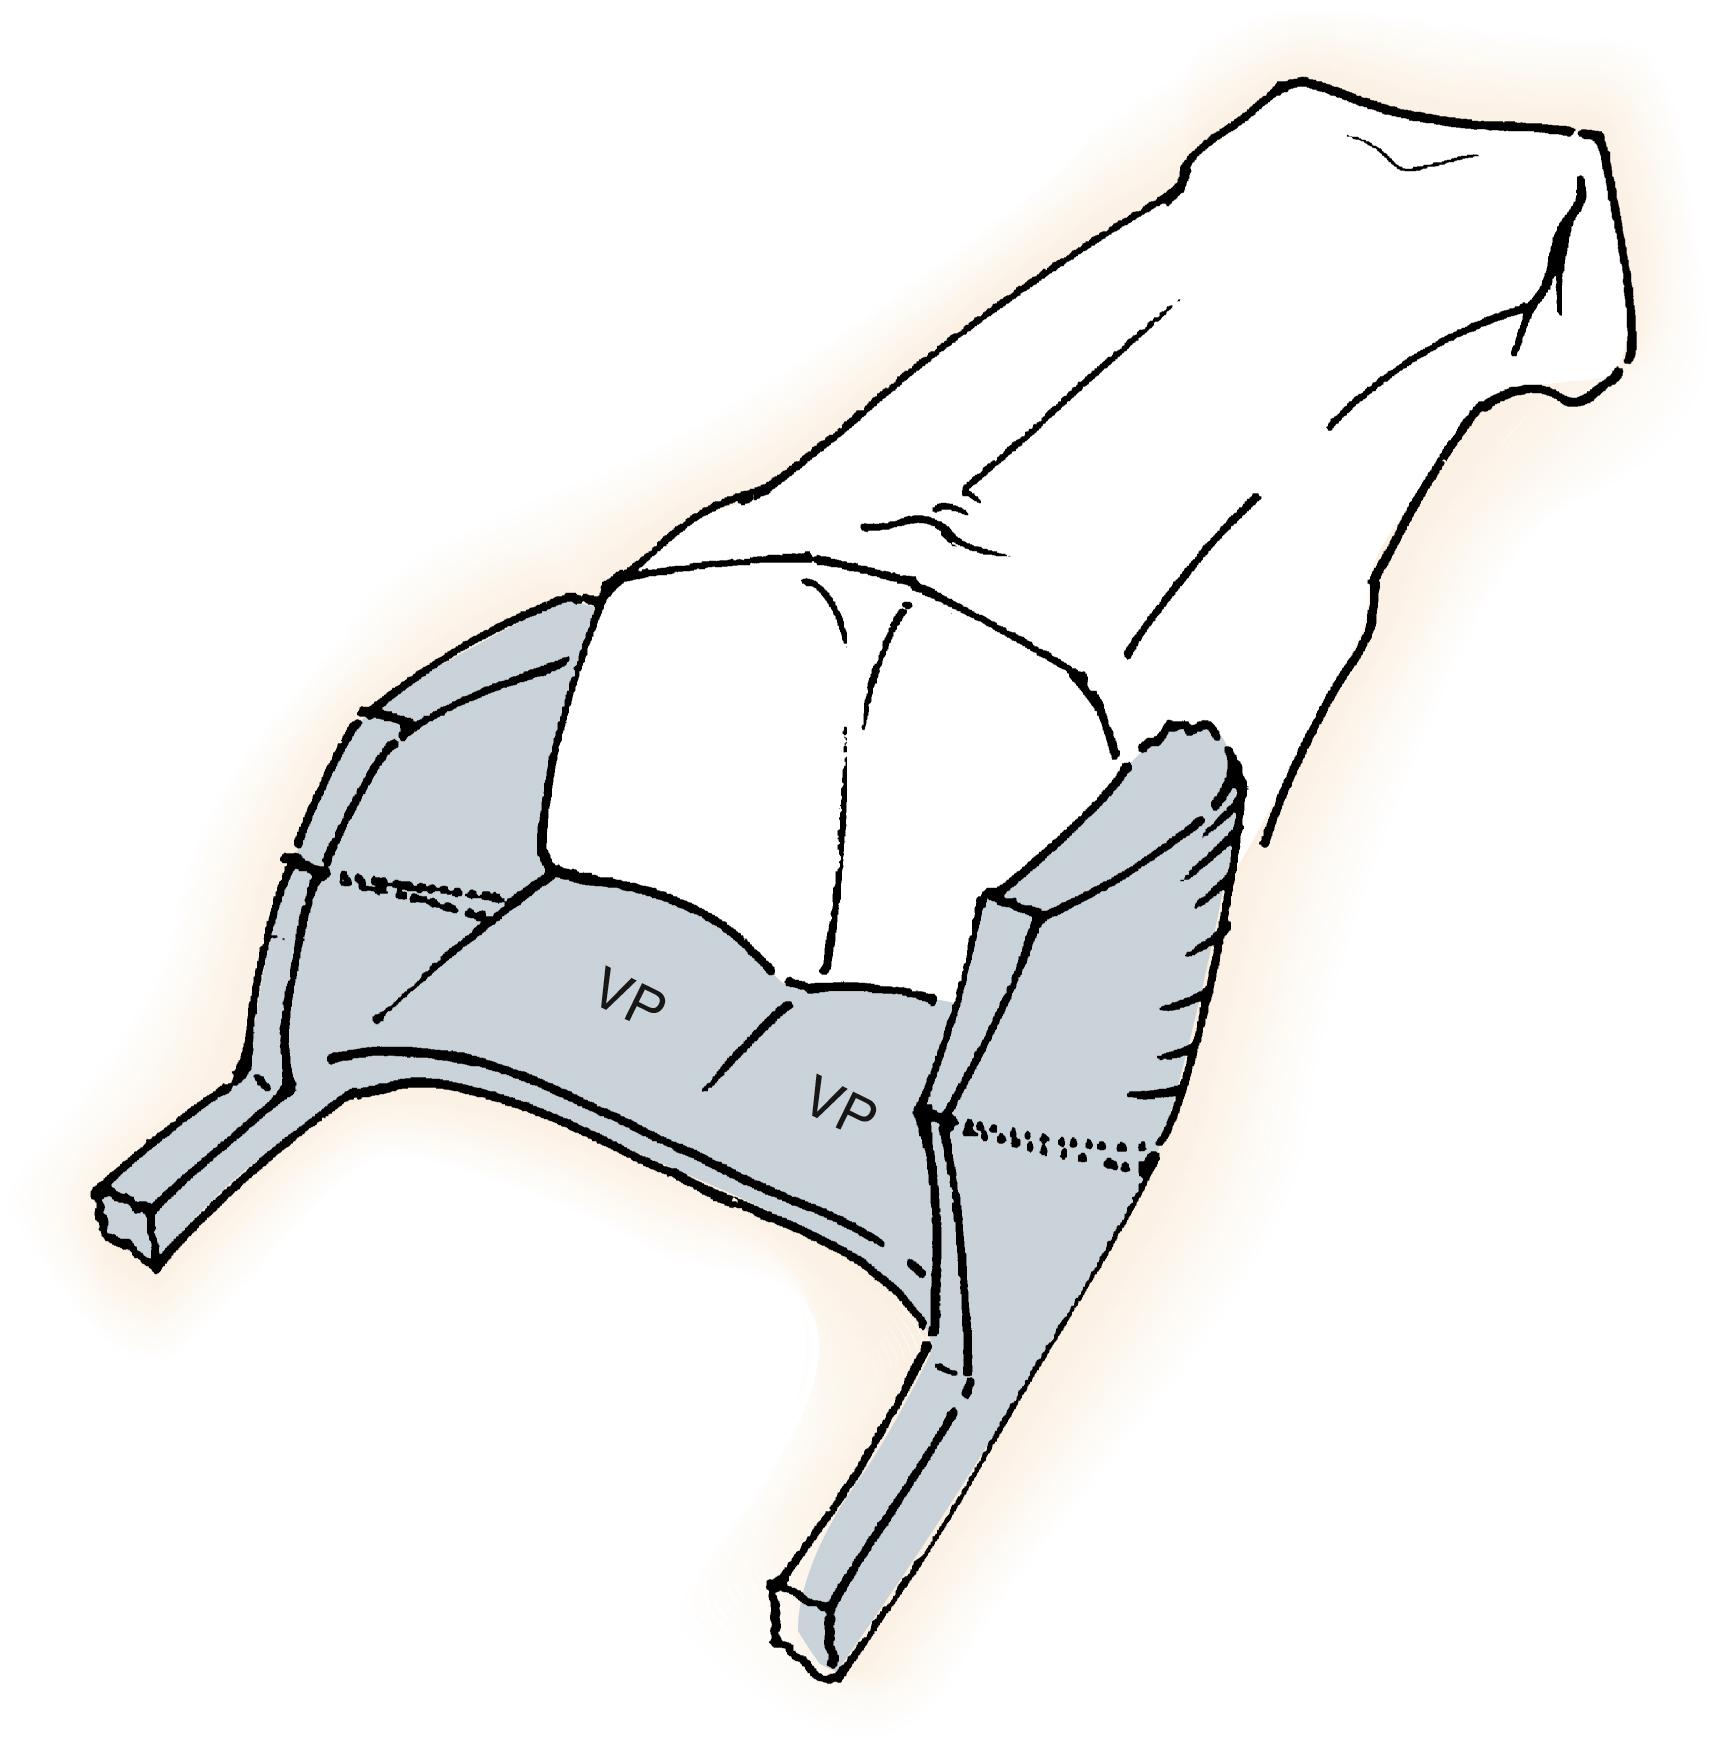 Fig. 8.1, “Three-sided box” of ligaments provides strength with minimal bulk. At least two sides of this box must be disrupted for displacement of the joint to occur. VP, Volar plate.